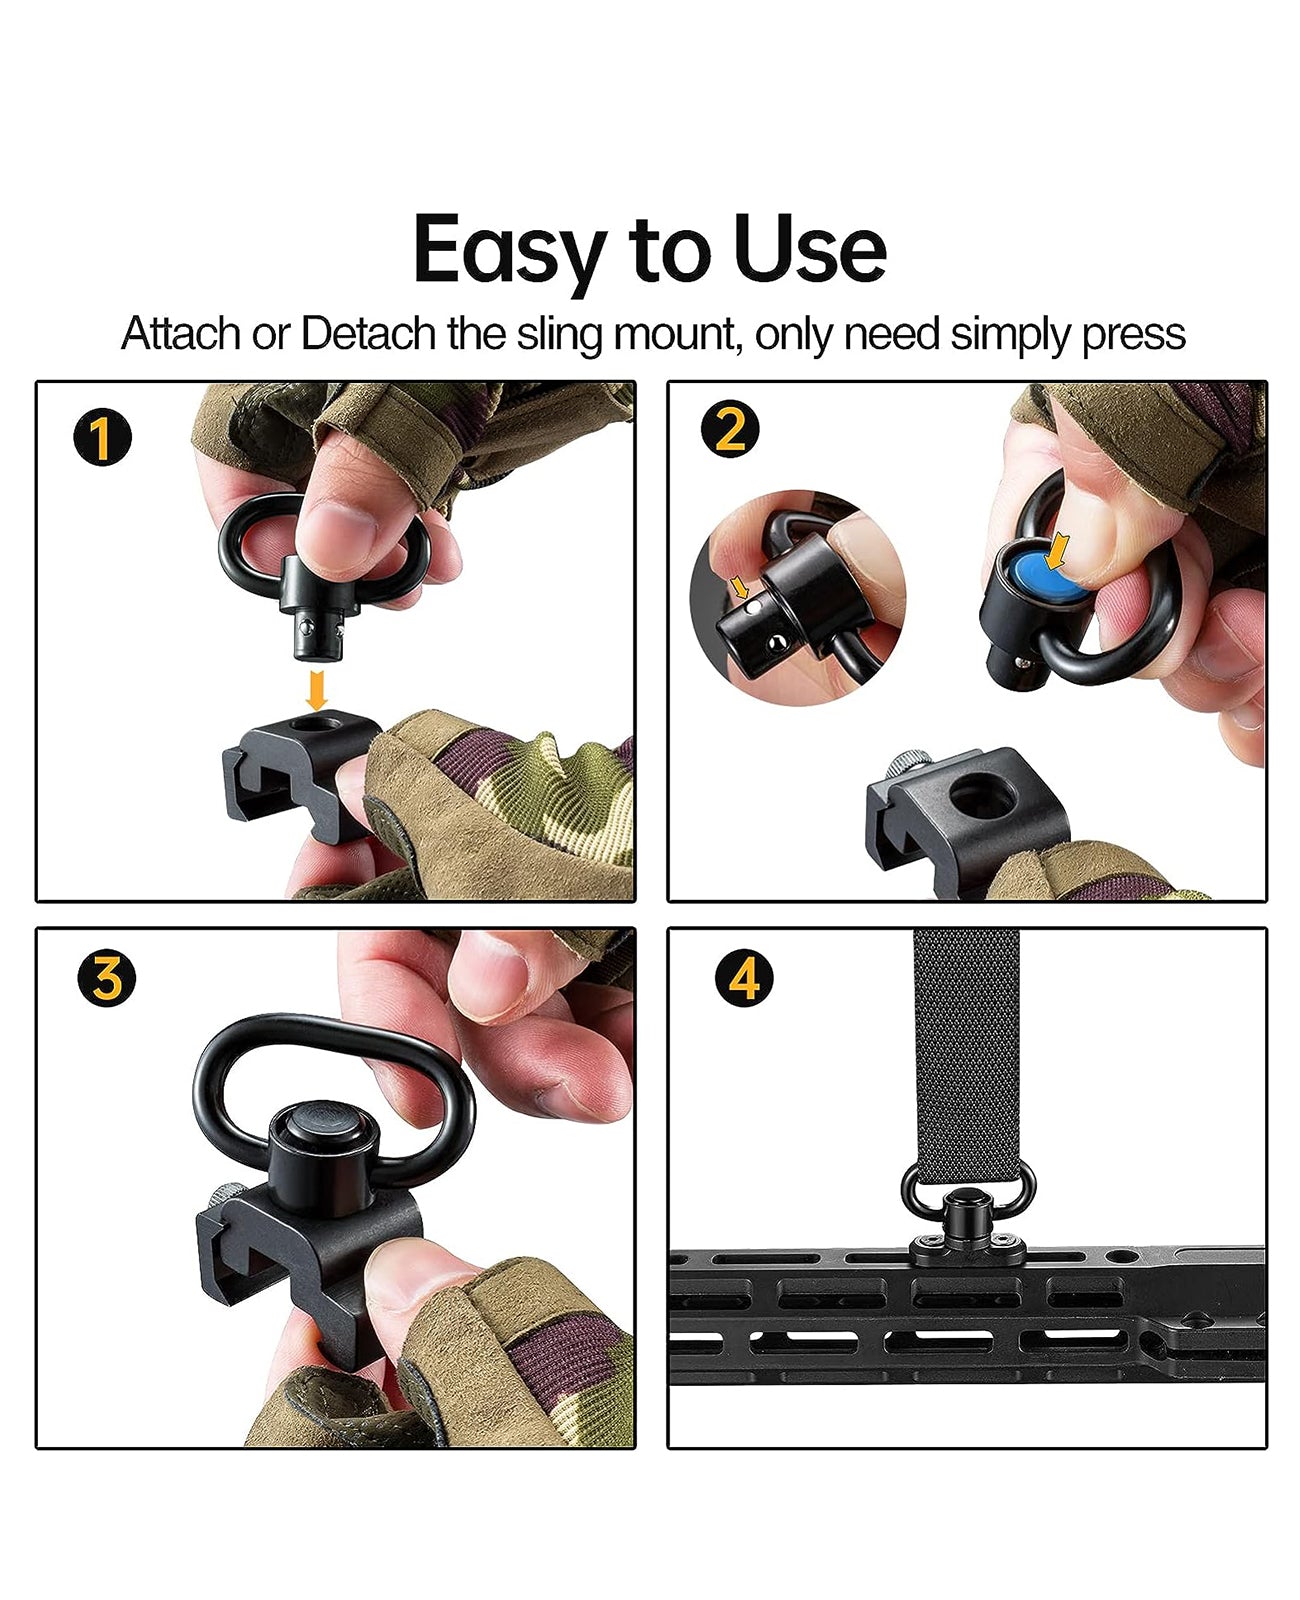 Easy to use sling swivels